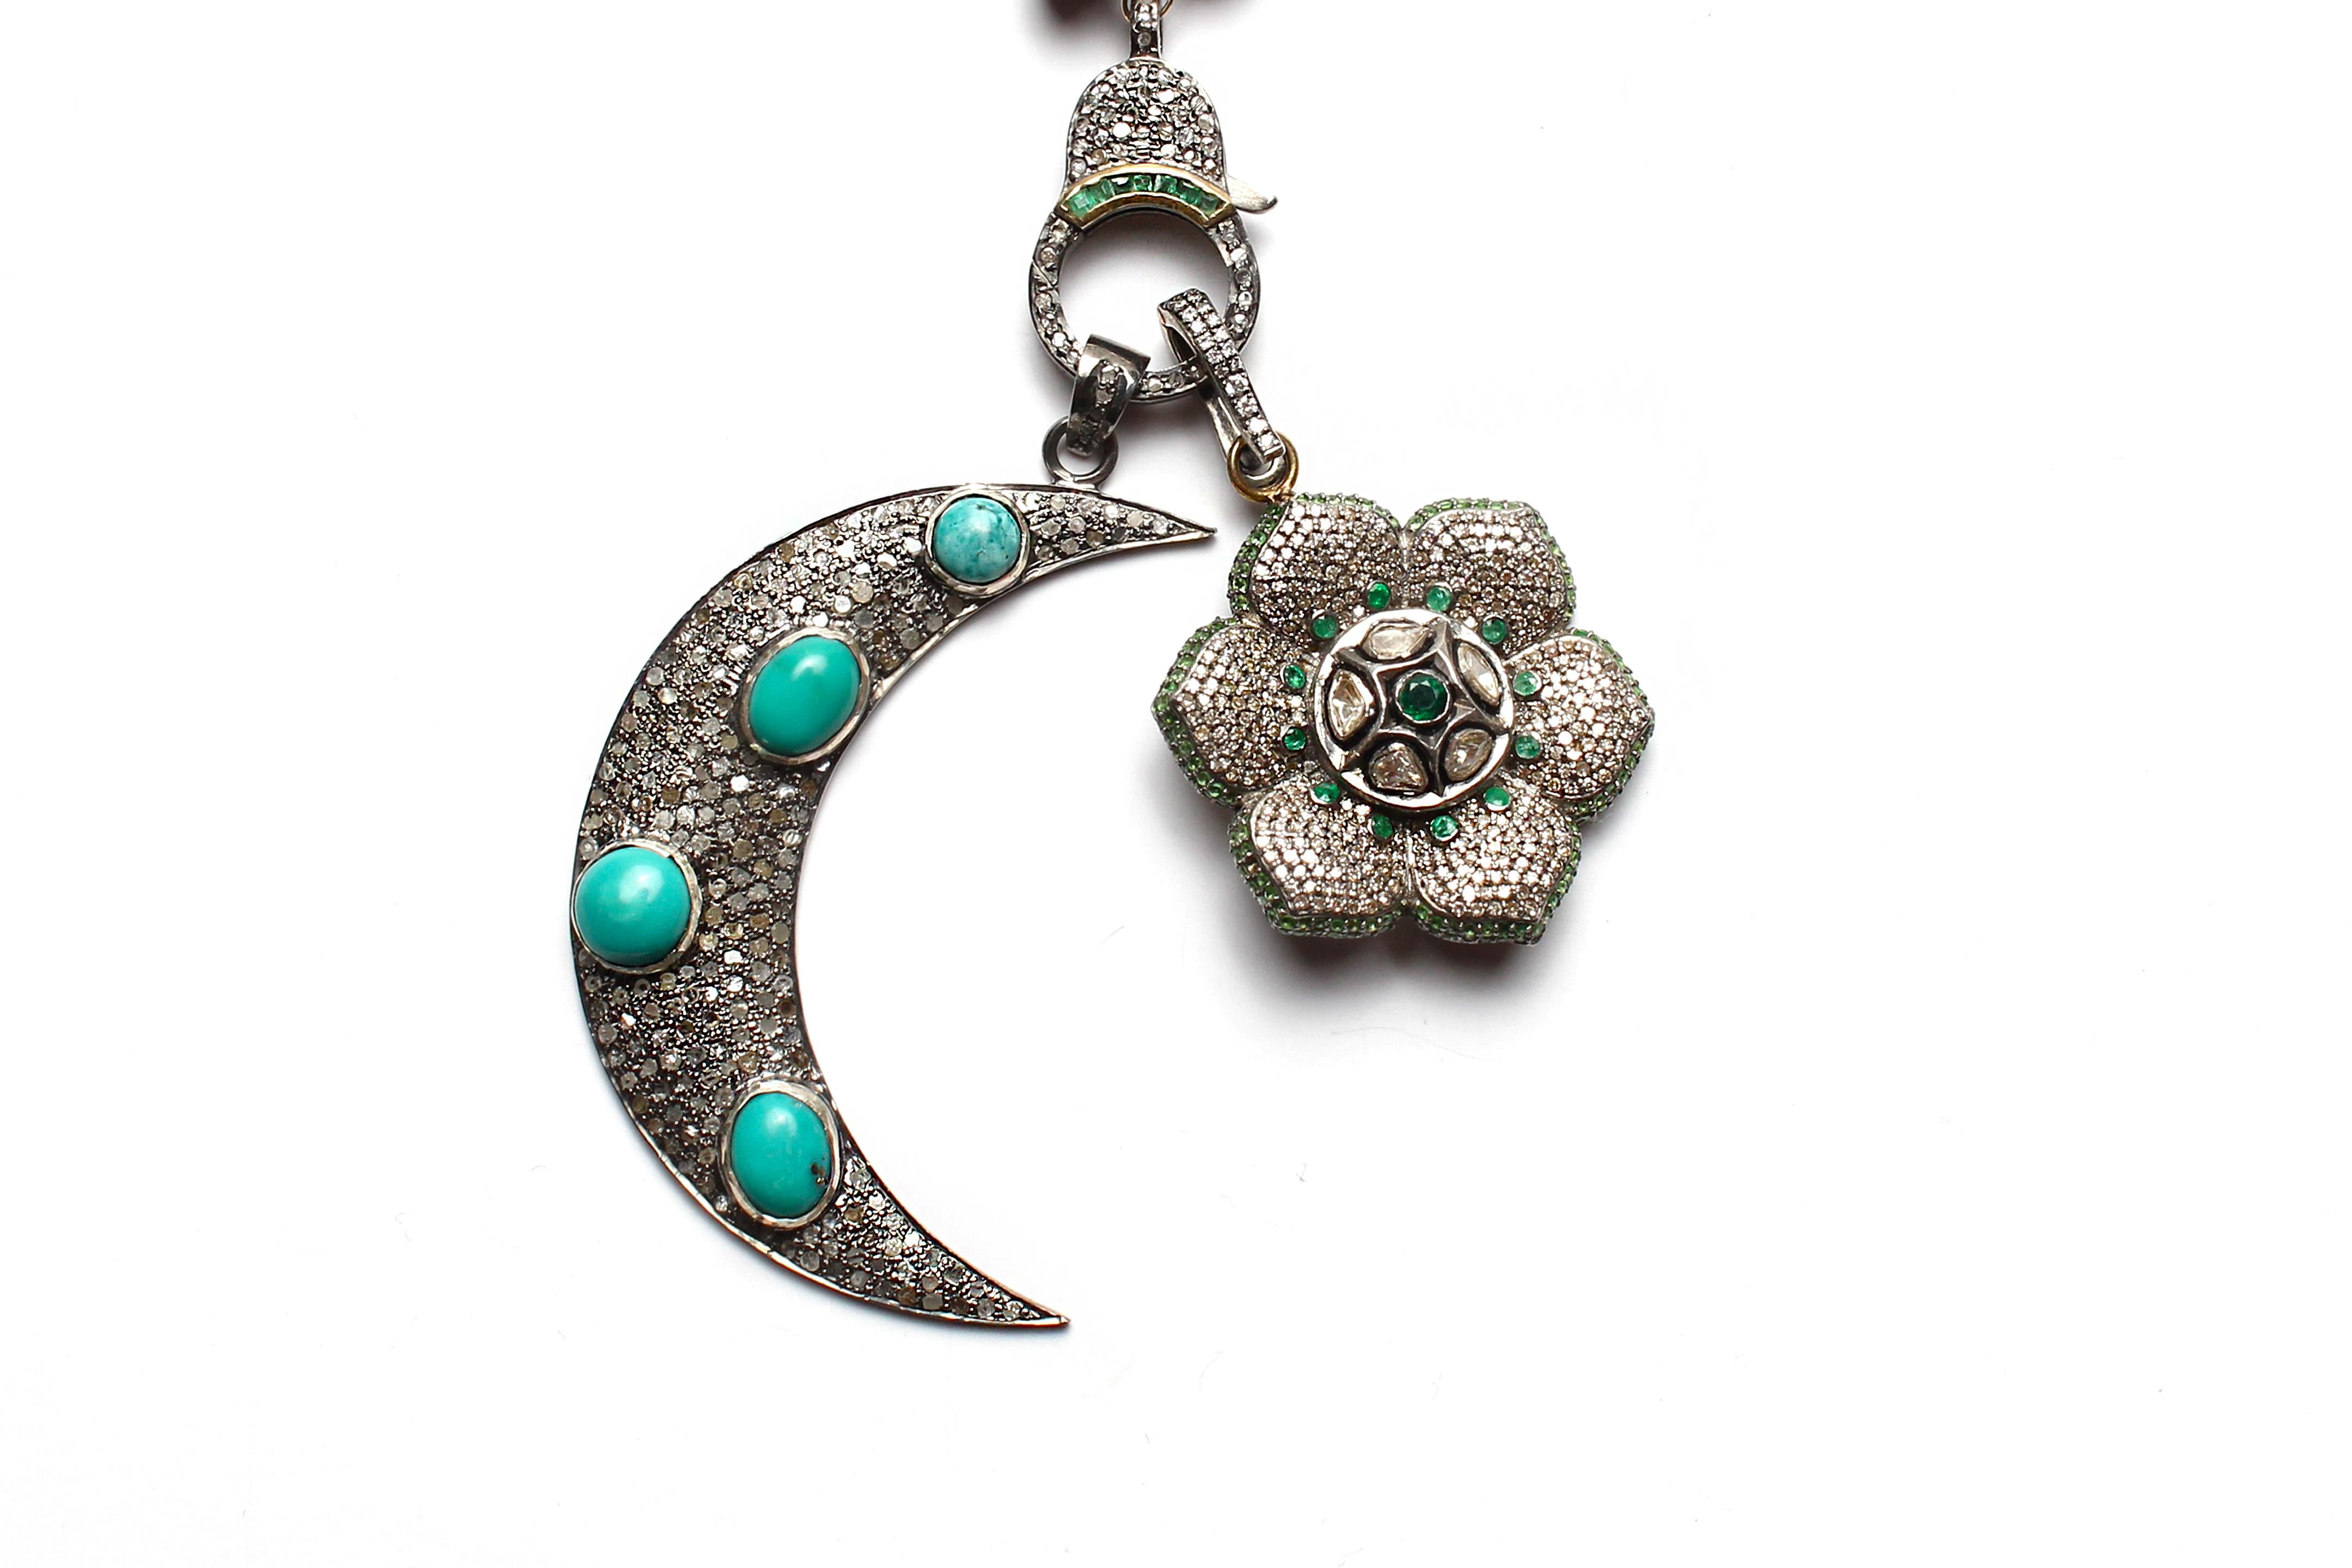 Contemporary Clarissa Bronfman Turquoise Emerald Moon Flower Charms Tourmaline Emerald Rosary